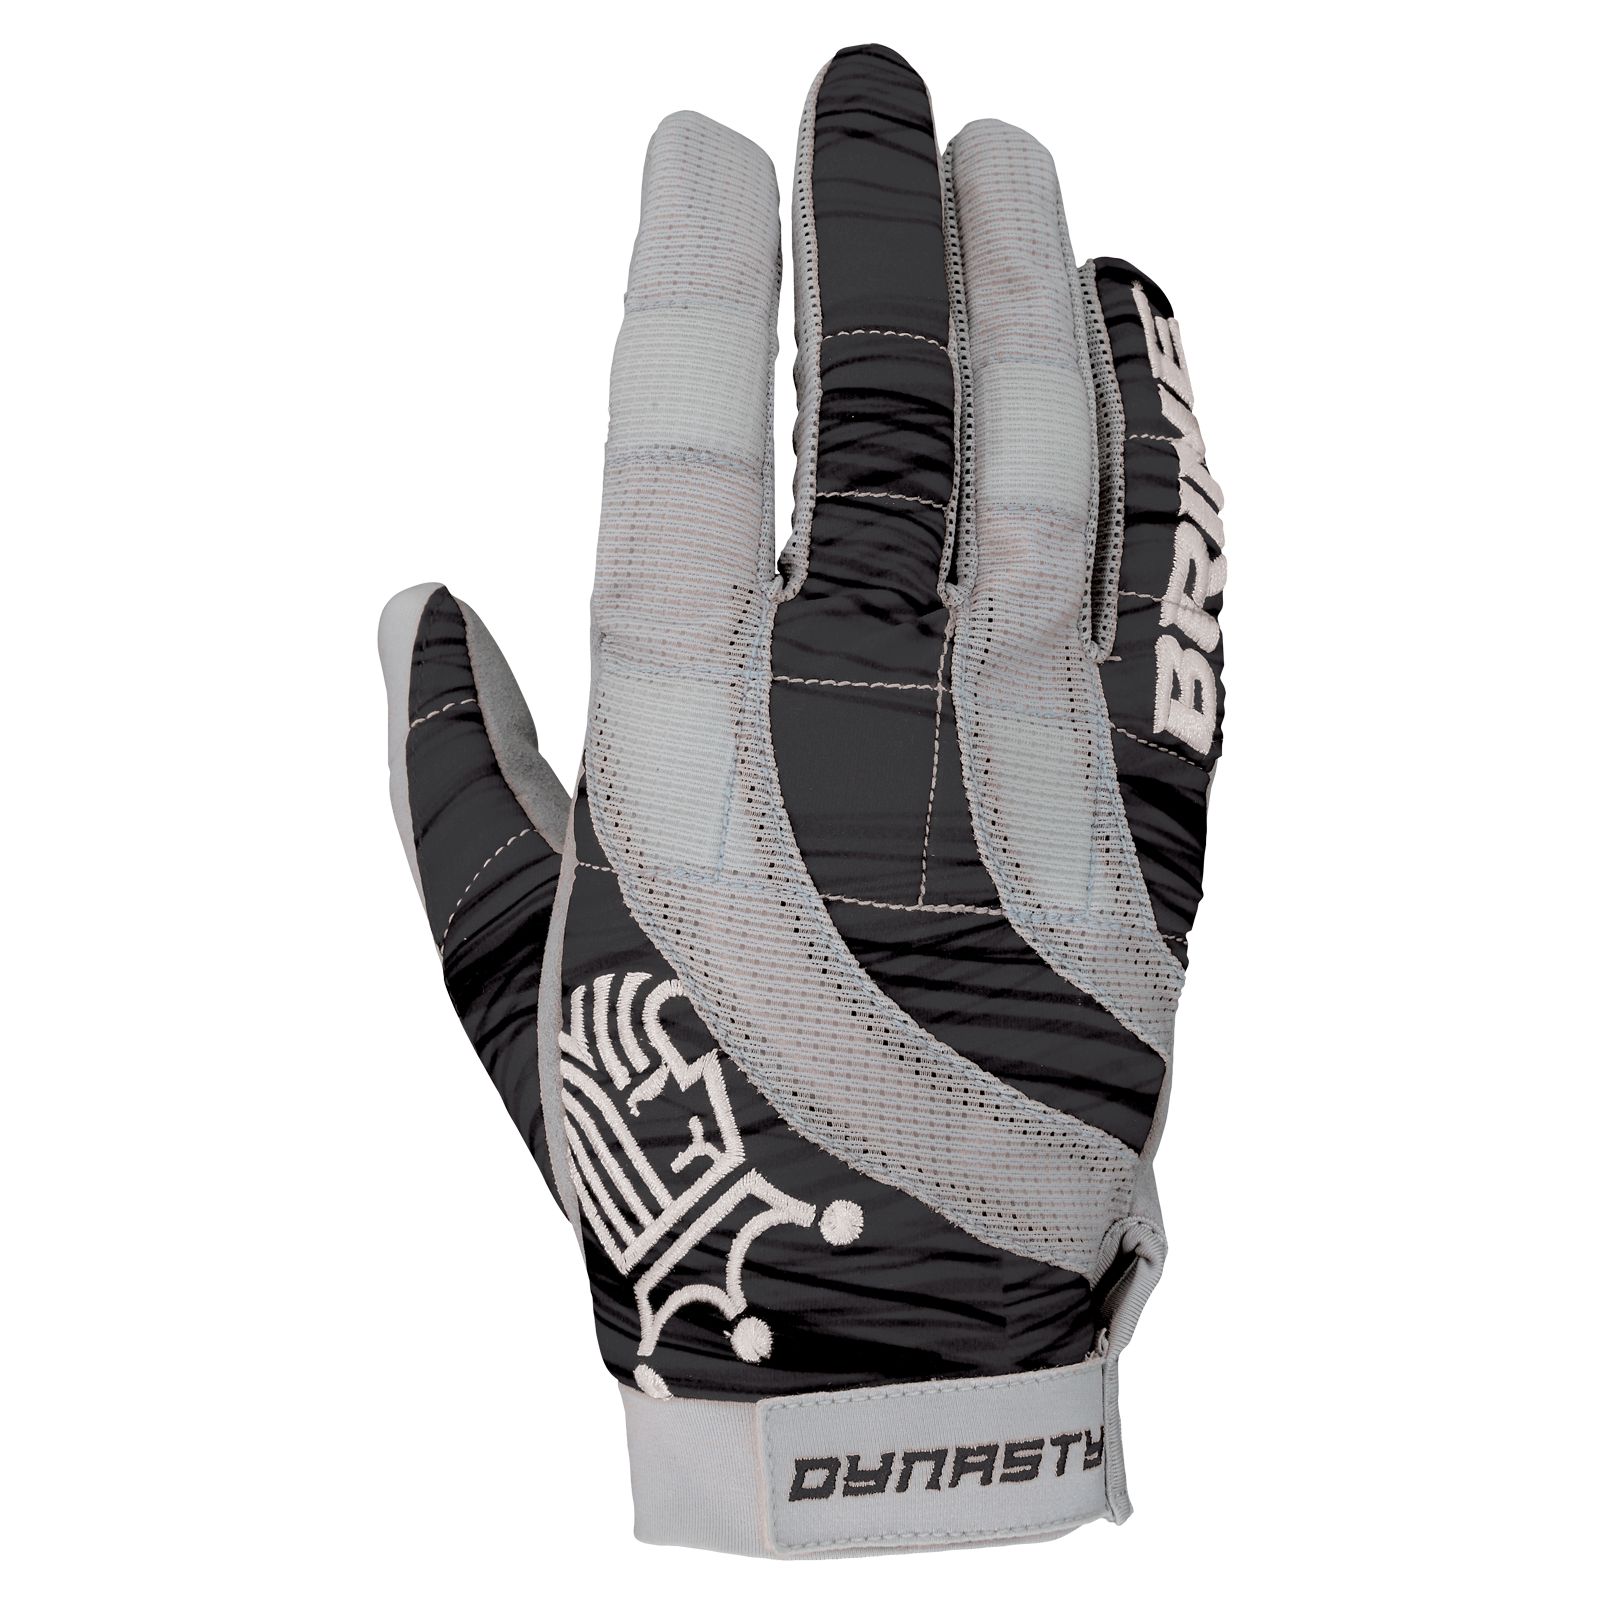 Dynasty Lax Glove, Black image number 0